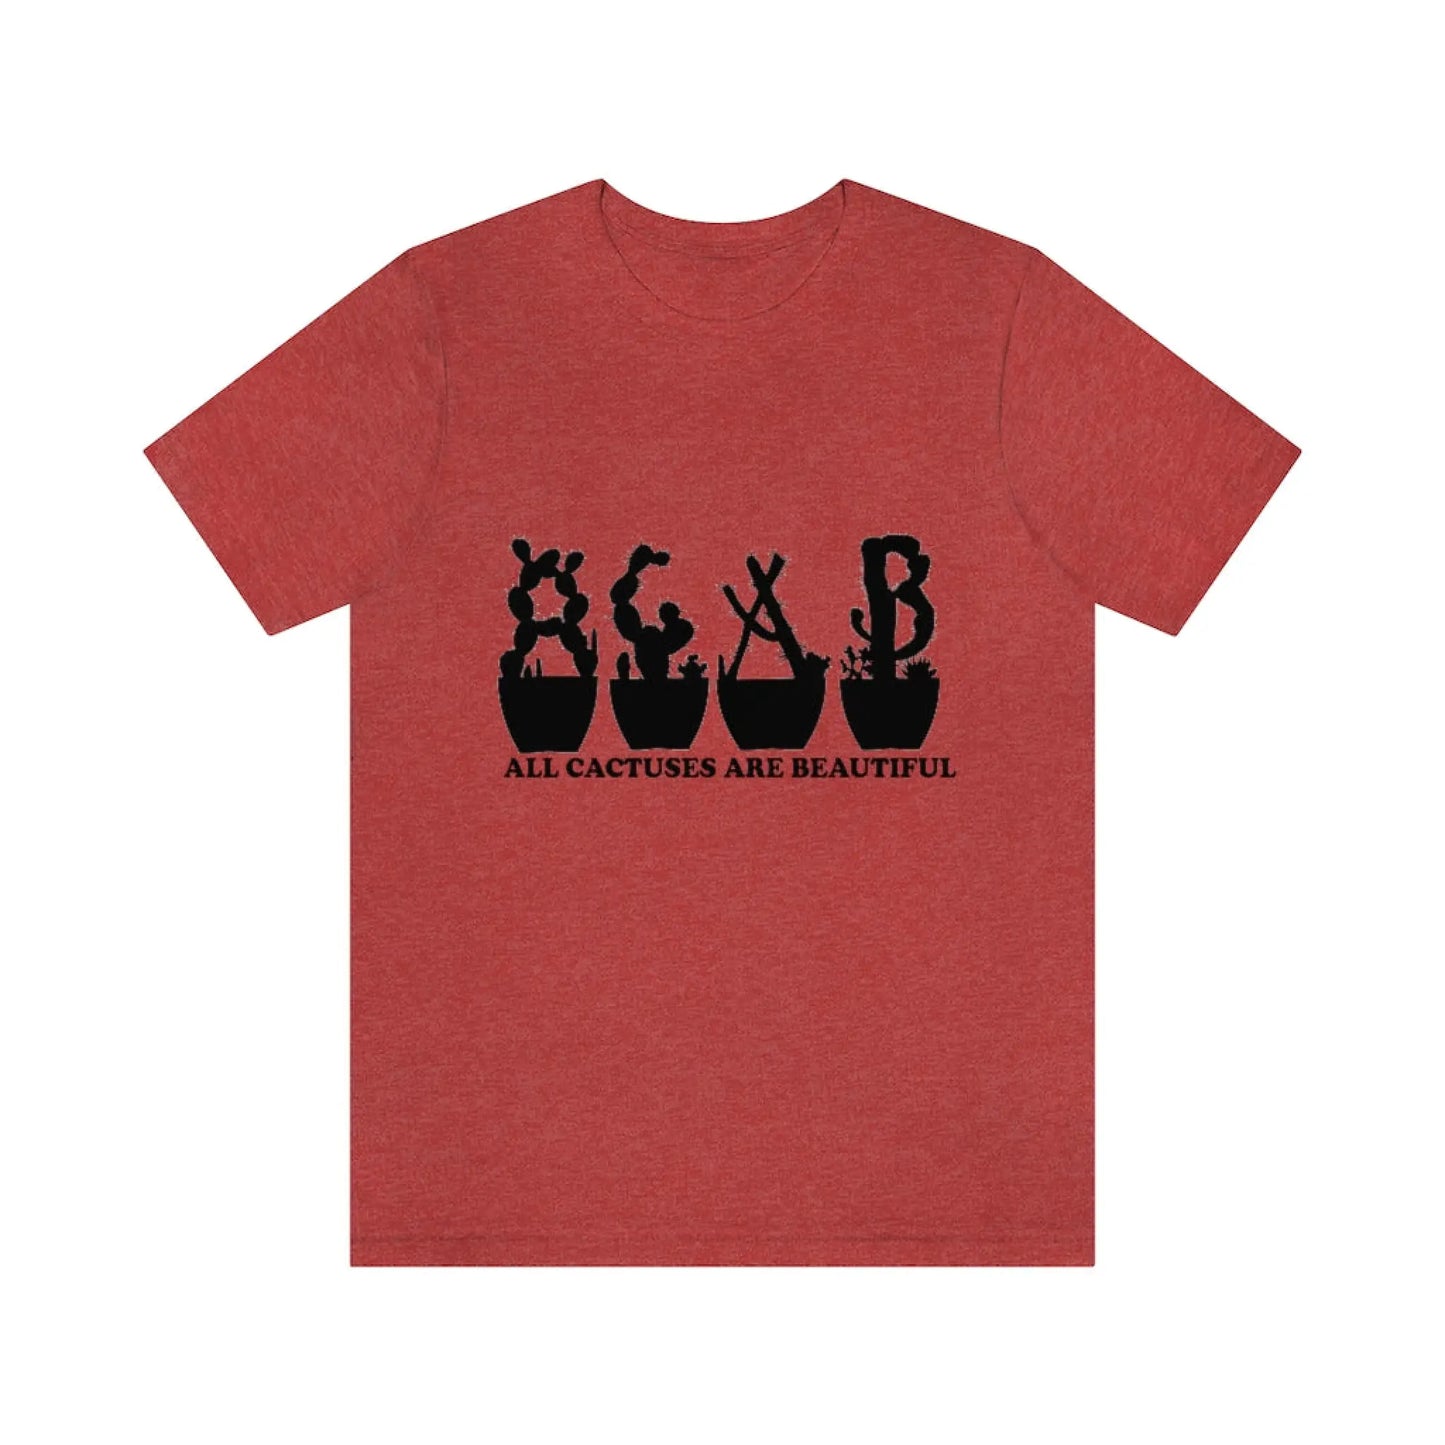 Shirts - All Cactuses Are Beautiful - Heather Red / S -